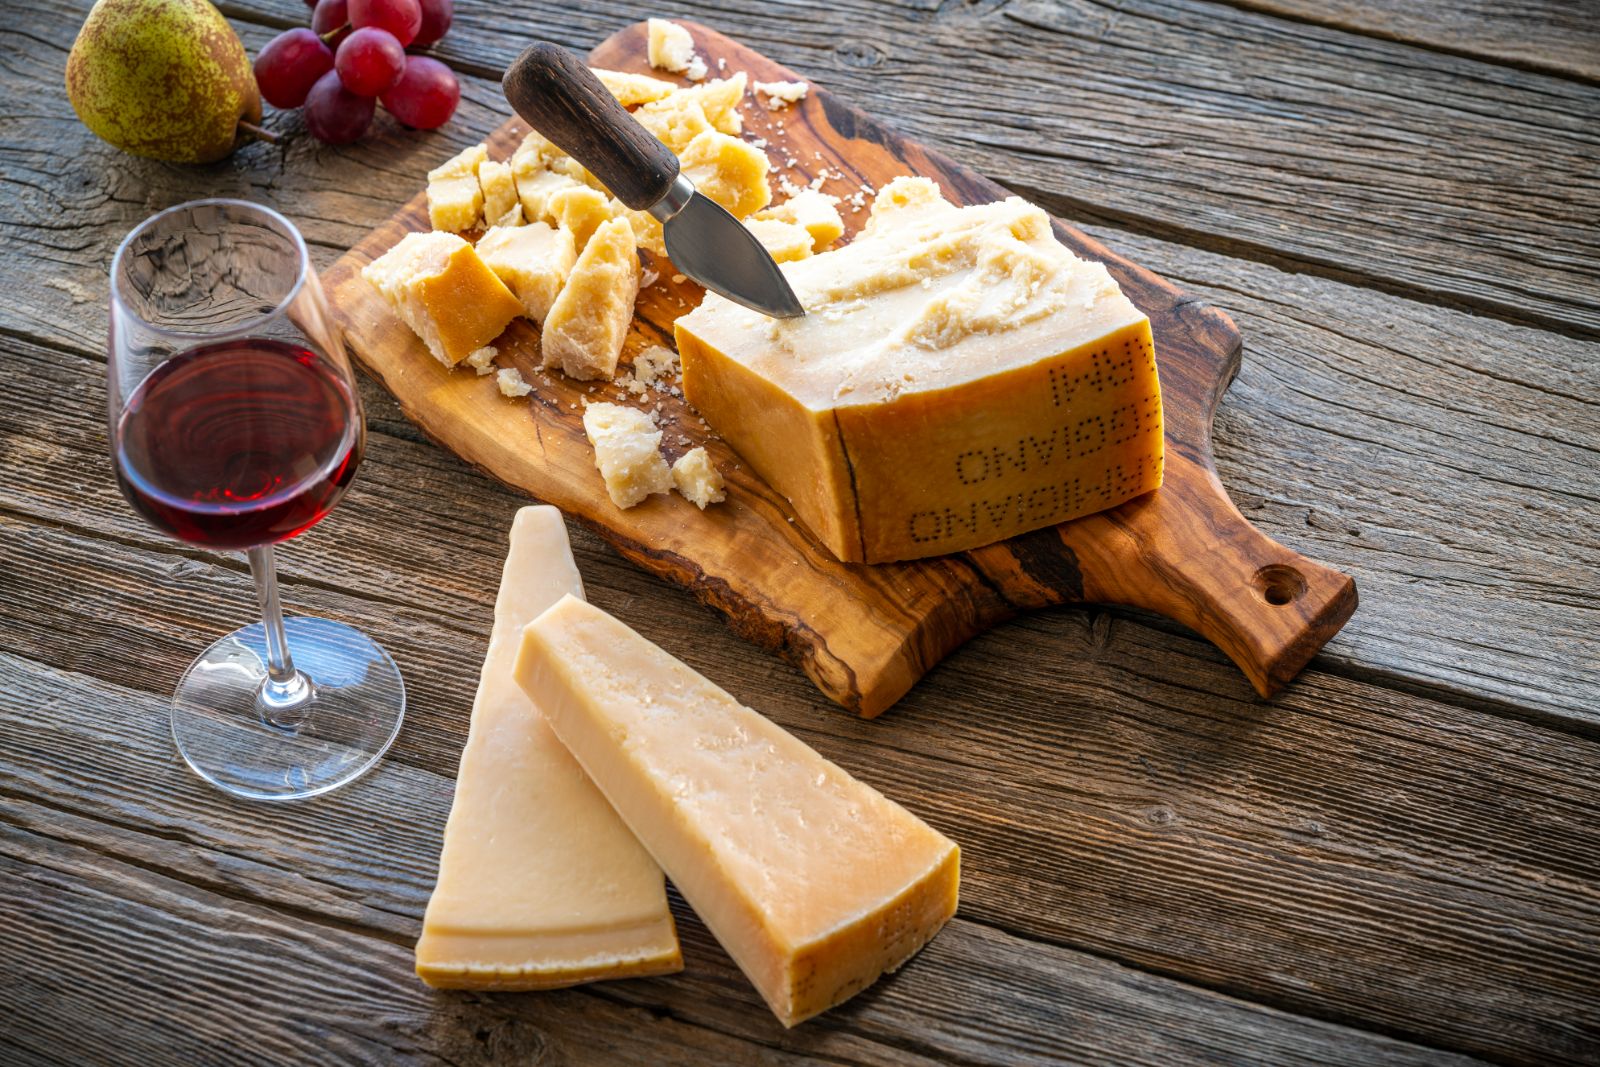 Glass of Italian red wine with a board of Parmigiano Reggiano cheese